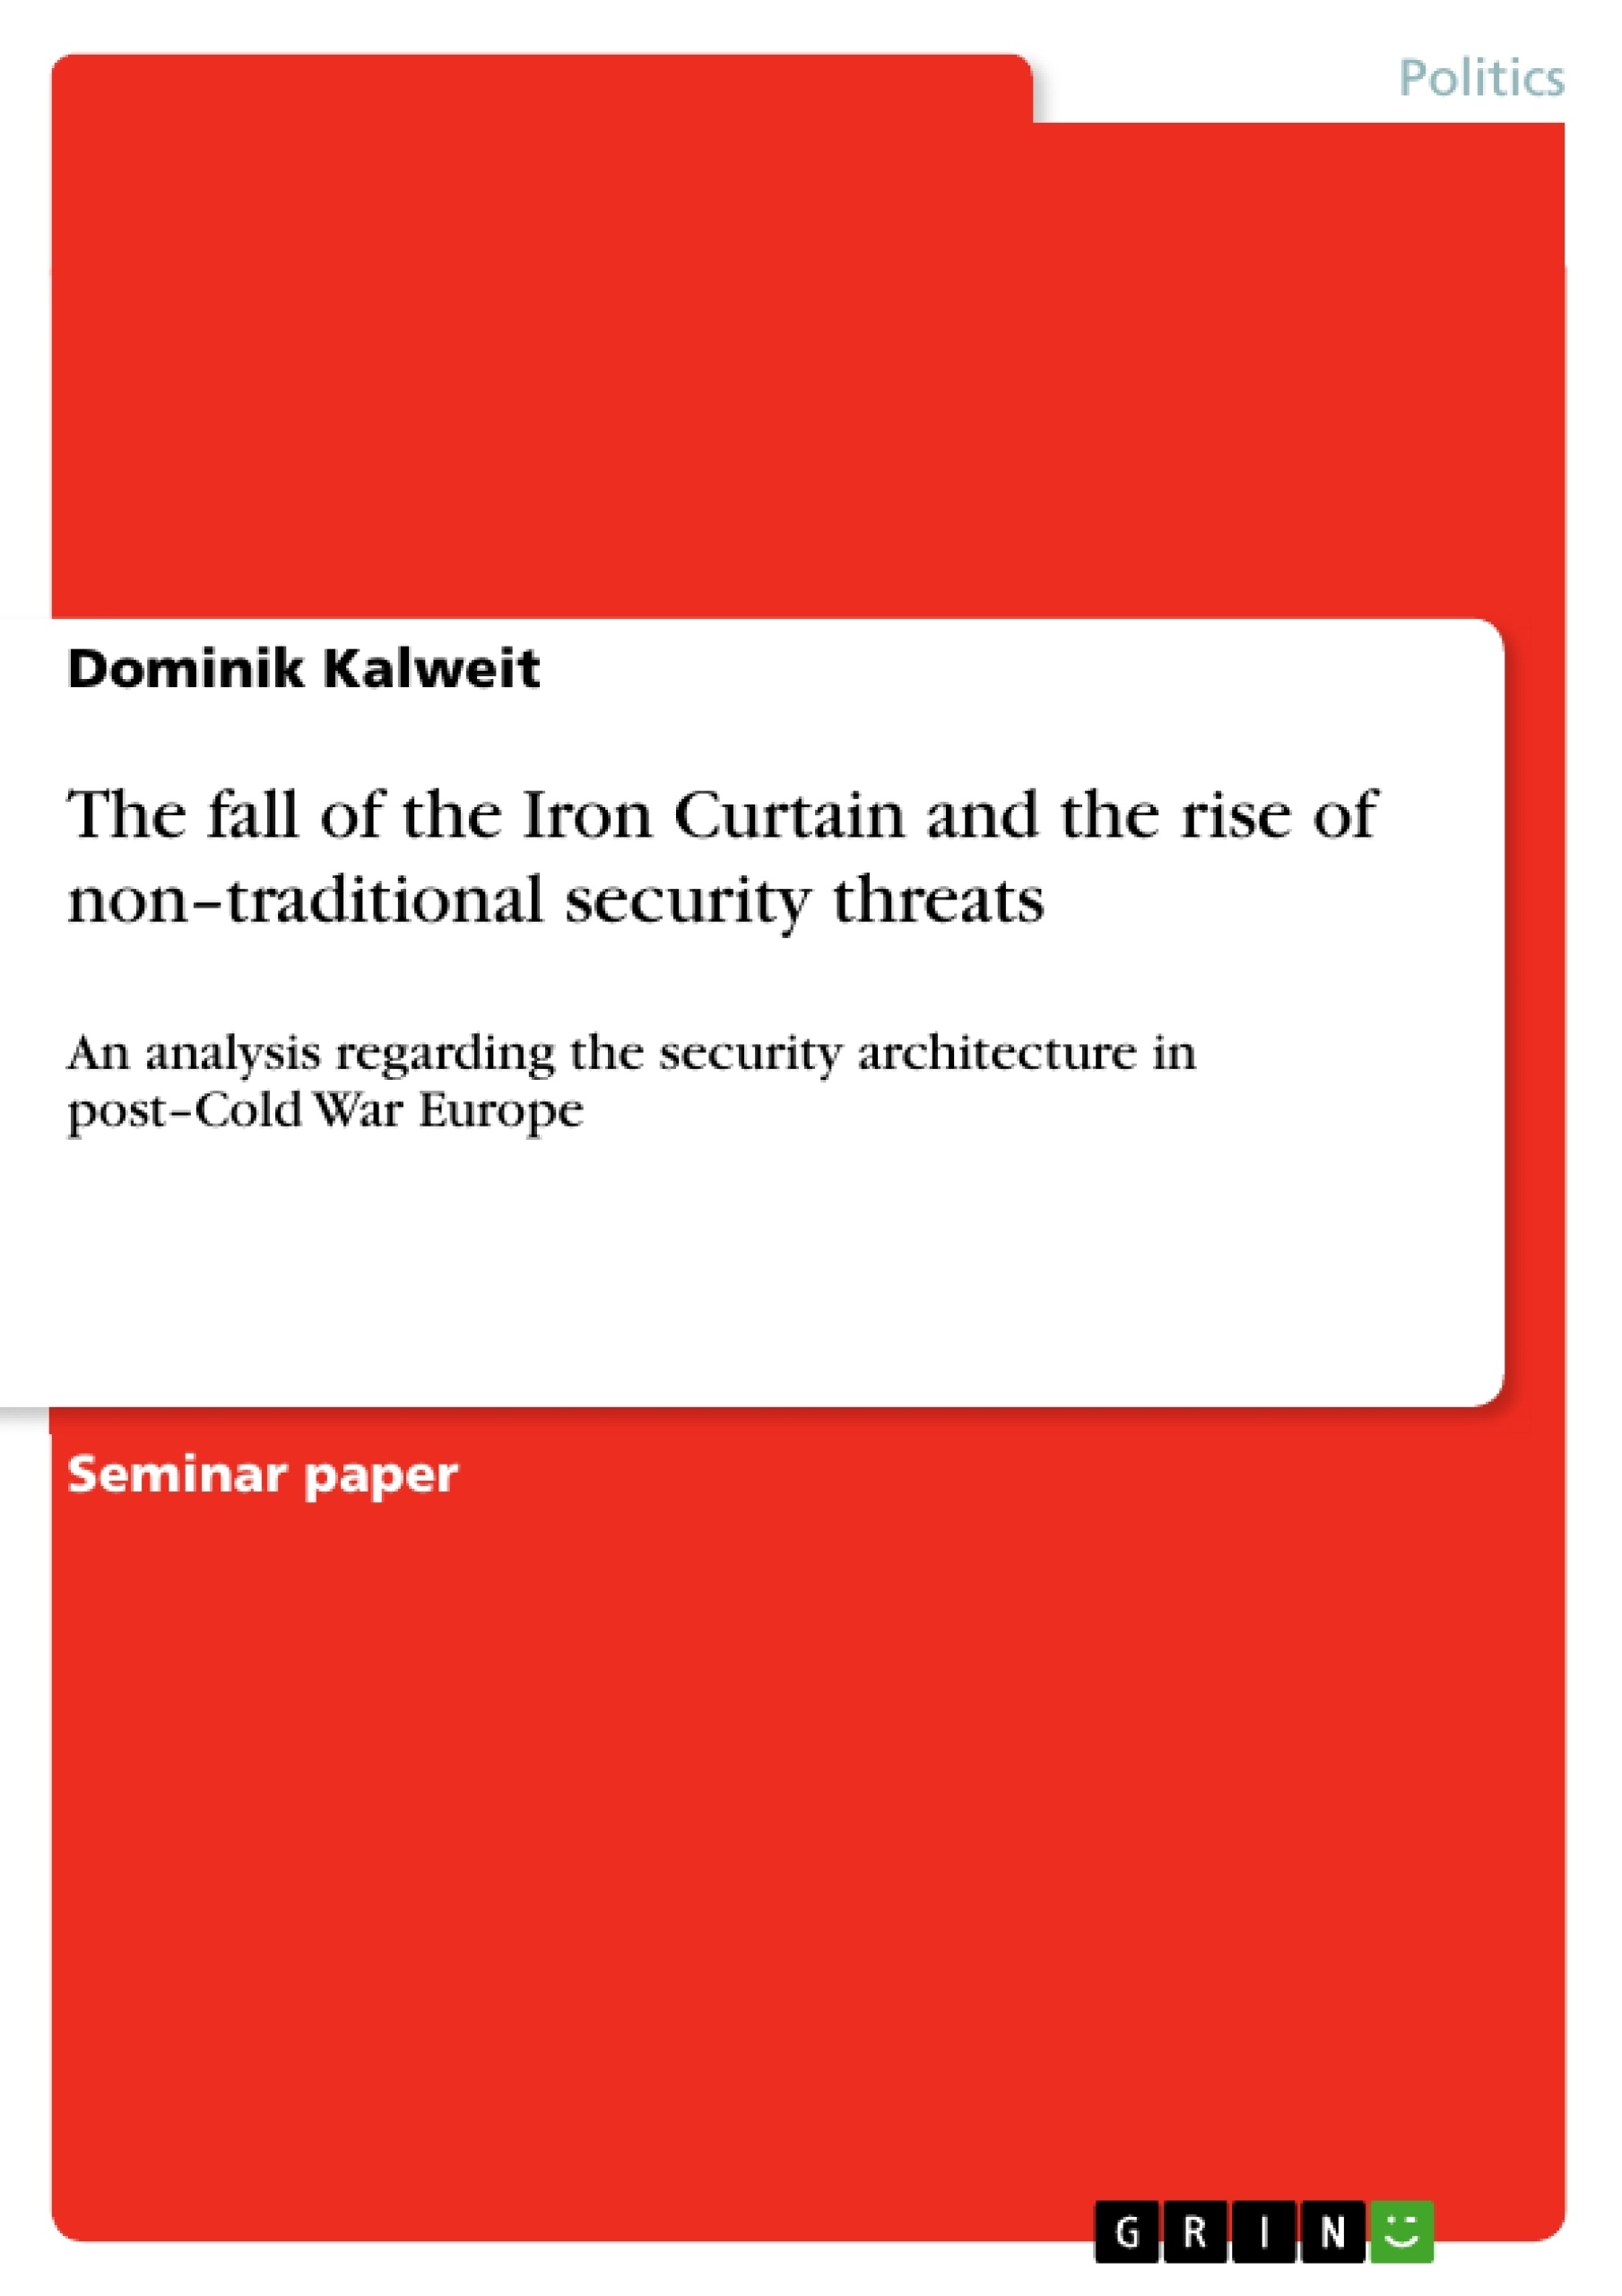 Title: The fall of the Iron Curtain and the rise of non–traditional security threats